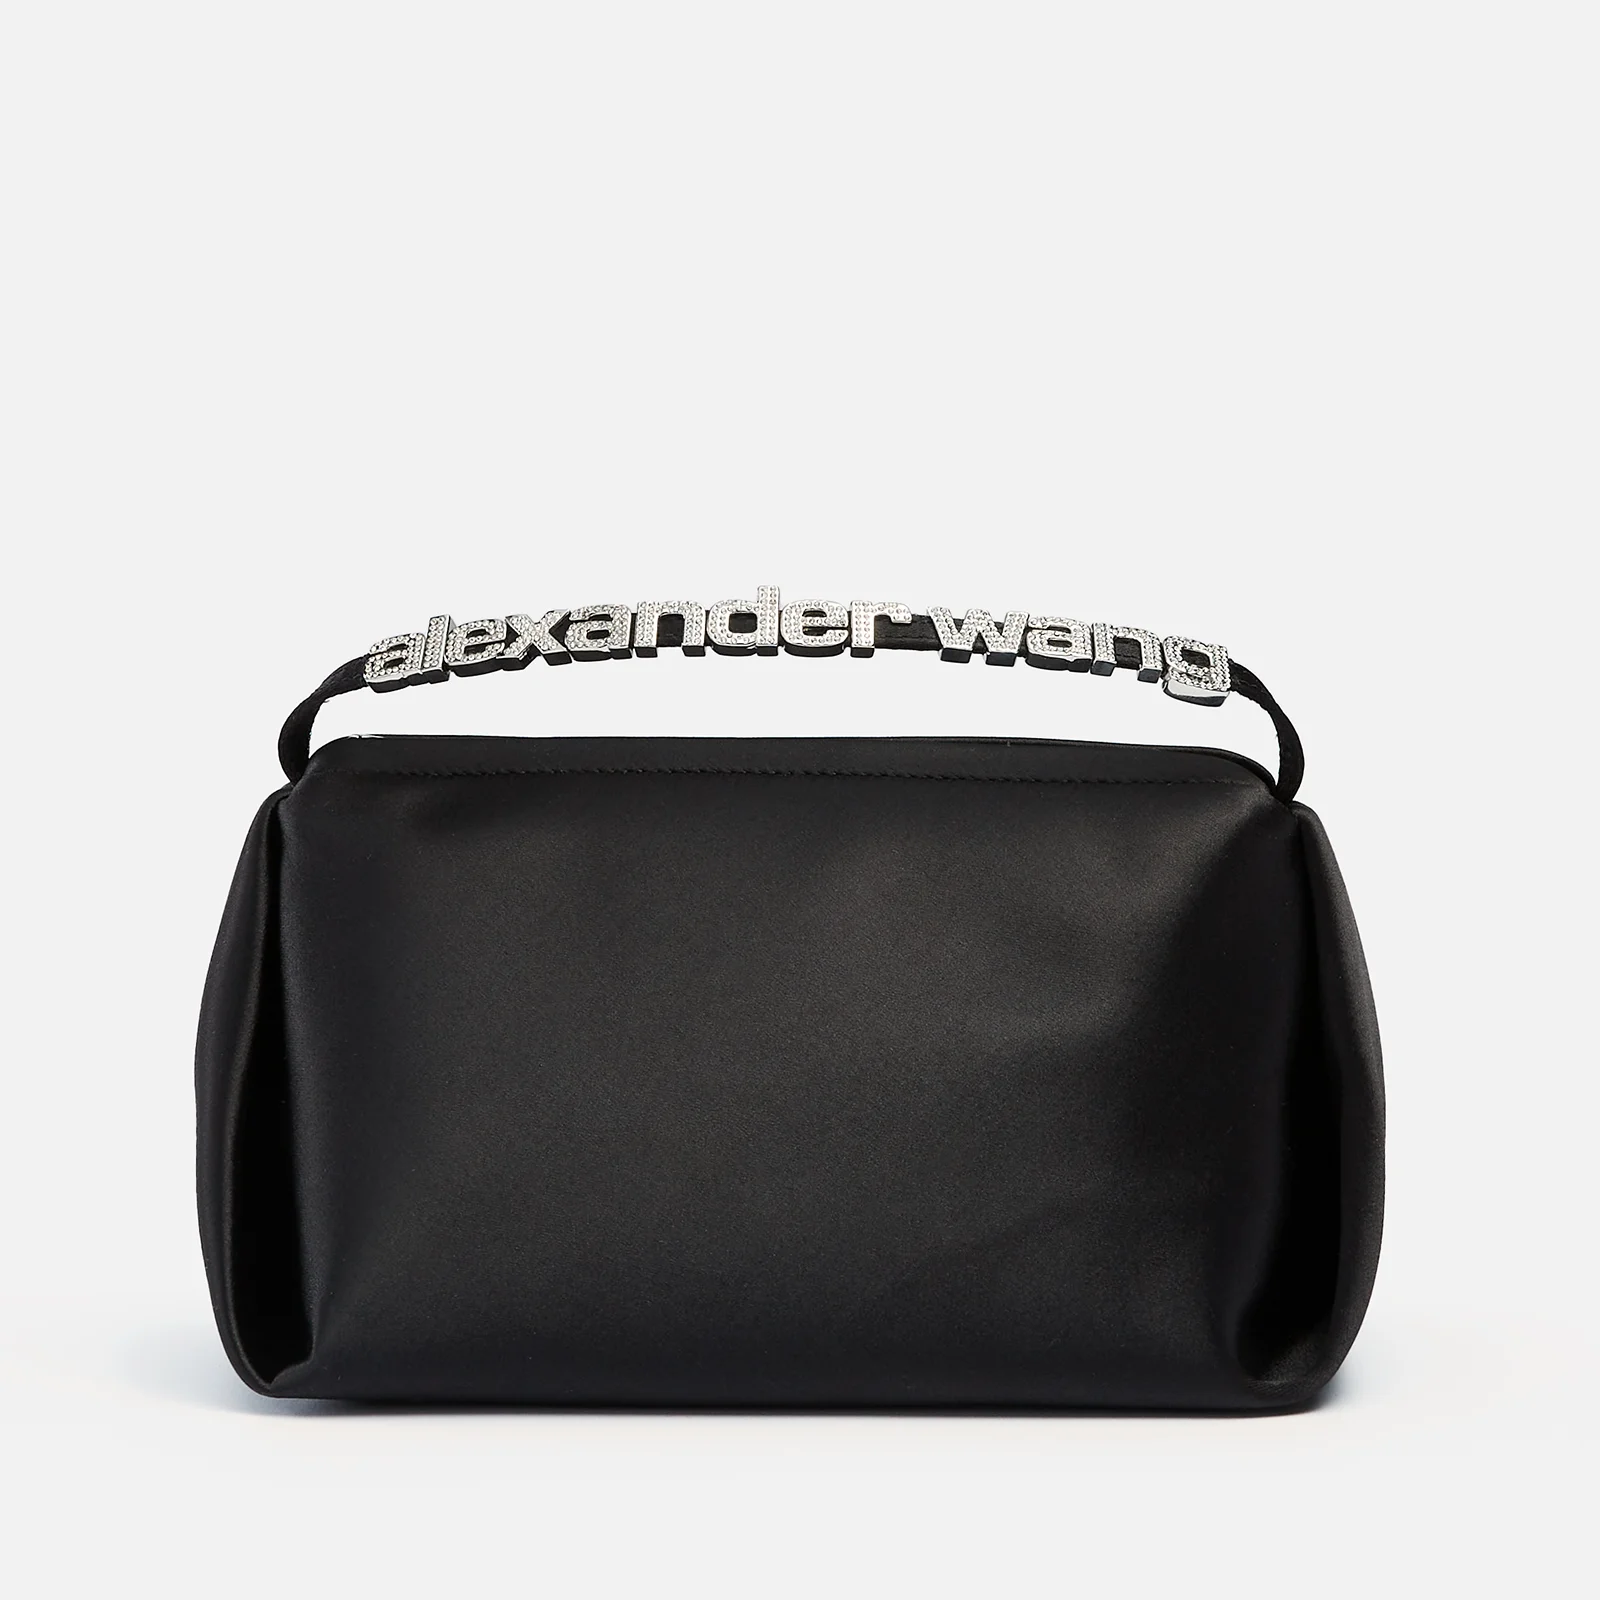 Alexander Wang Women's Marquess Micro Bag with Crystal Charms - Black Image 1